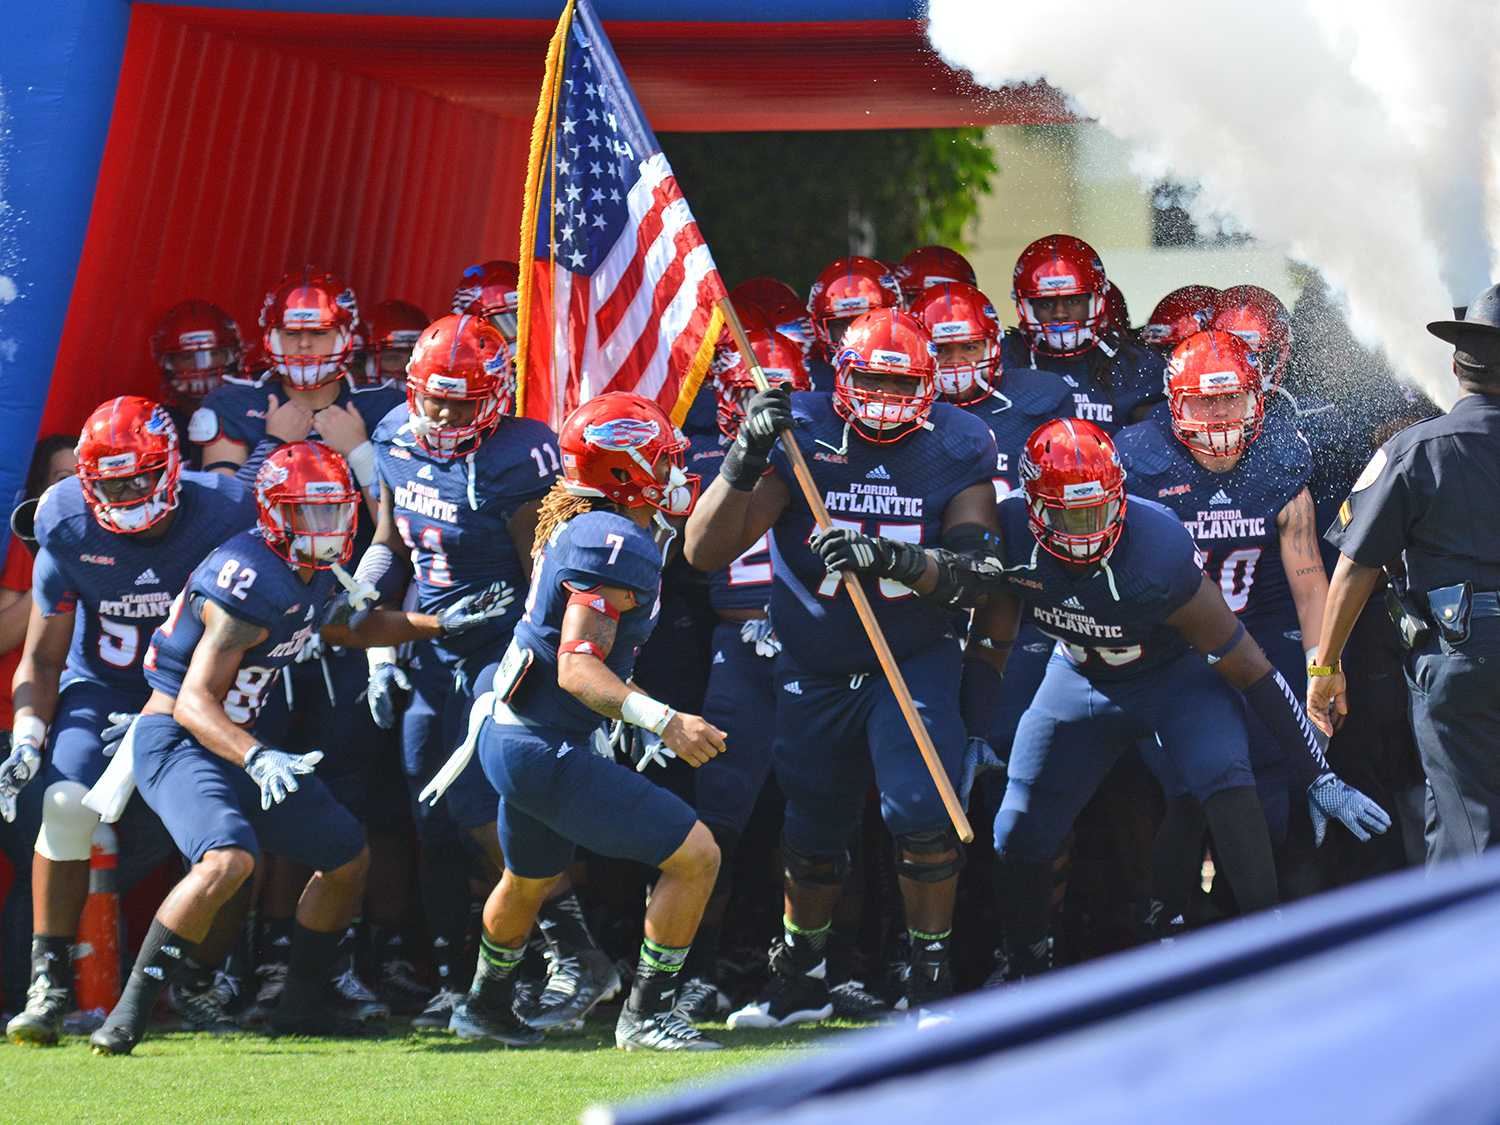 The Owls takes the field for their last game of the season. FAU finished the 2014 season with a 3-9 record after the 31-28 loss against Old Dominion.  